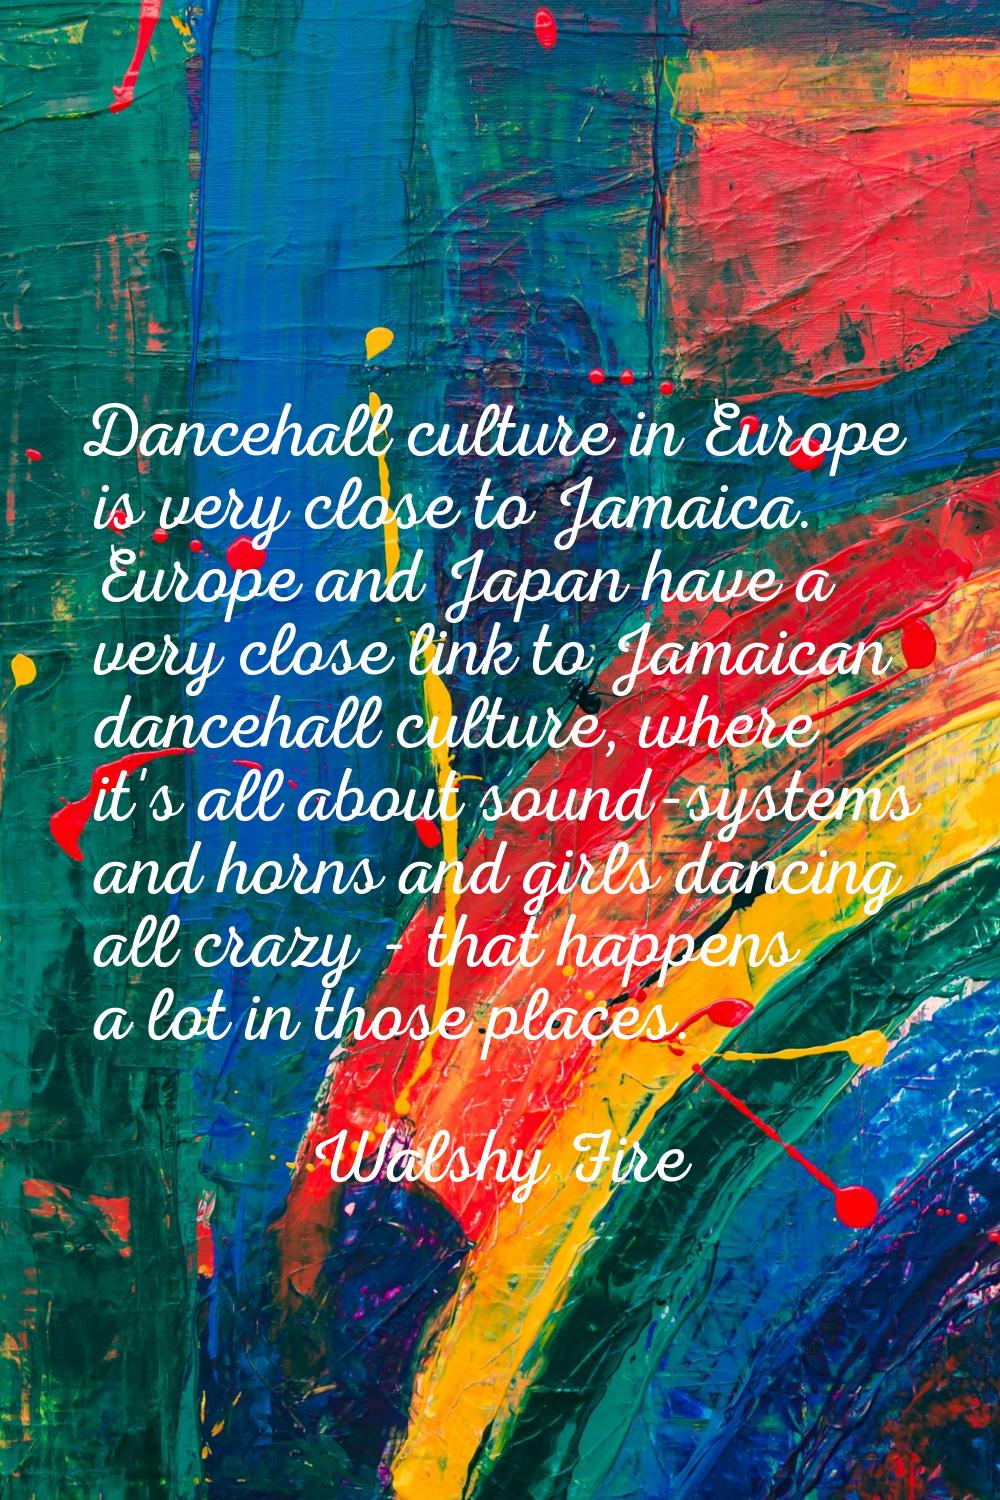 Dancehall culture in Europe is very close to Jamaica. Europe and Japan have a very close link to Ja